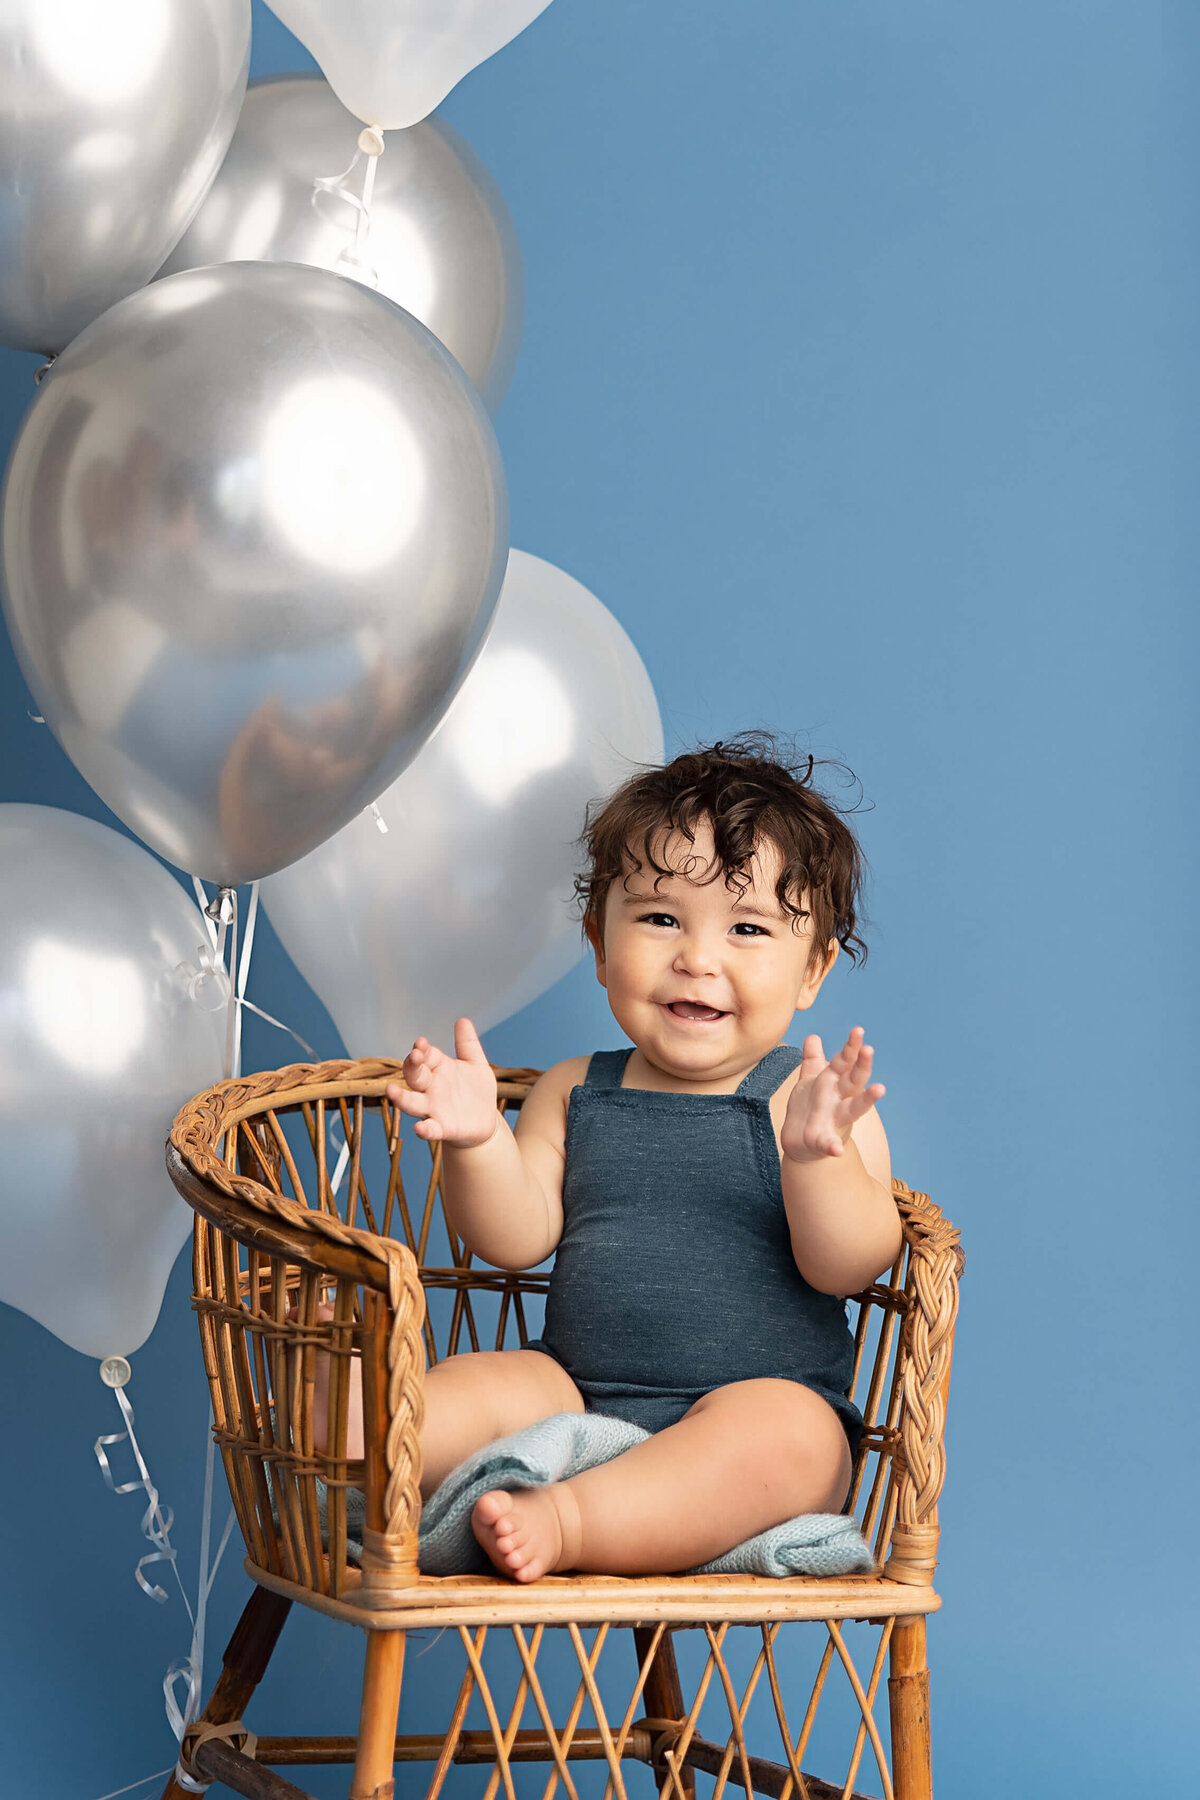 baby boy sitting in little chair smiling and clapping with silver balloons in the backgound and blue backdrop